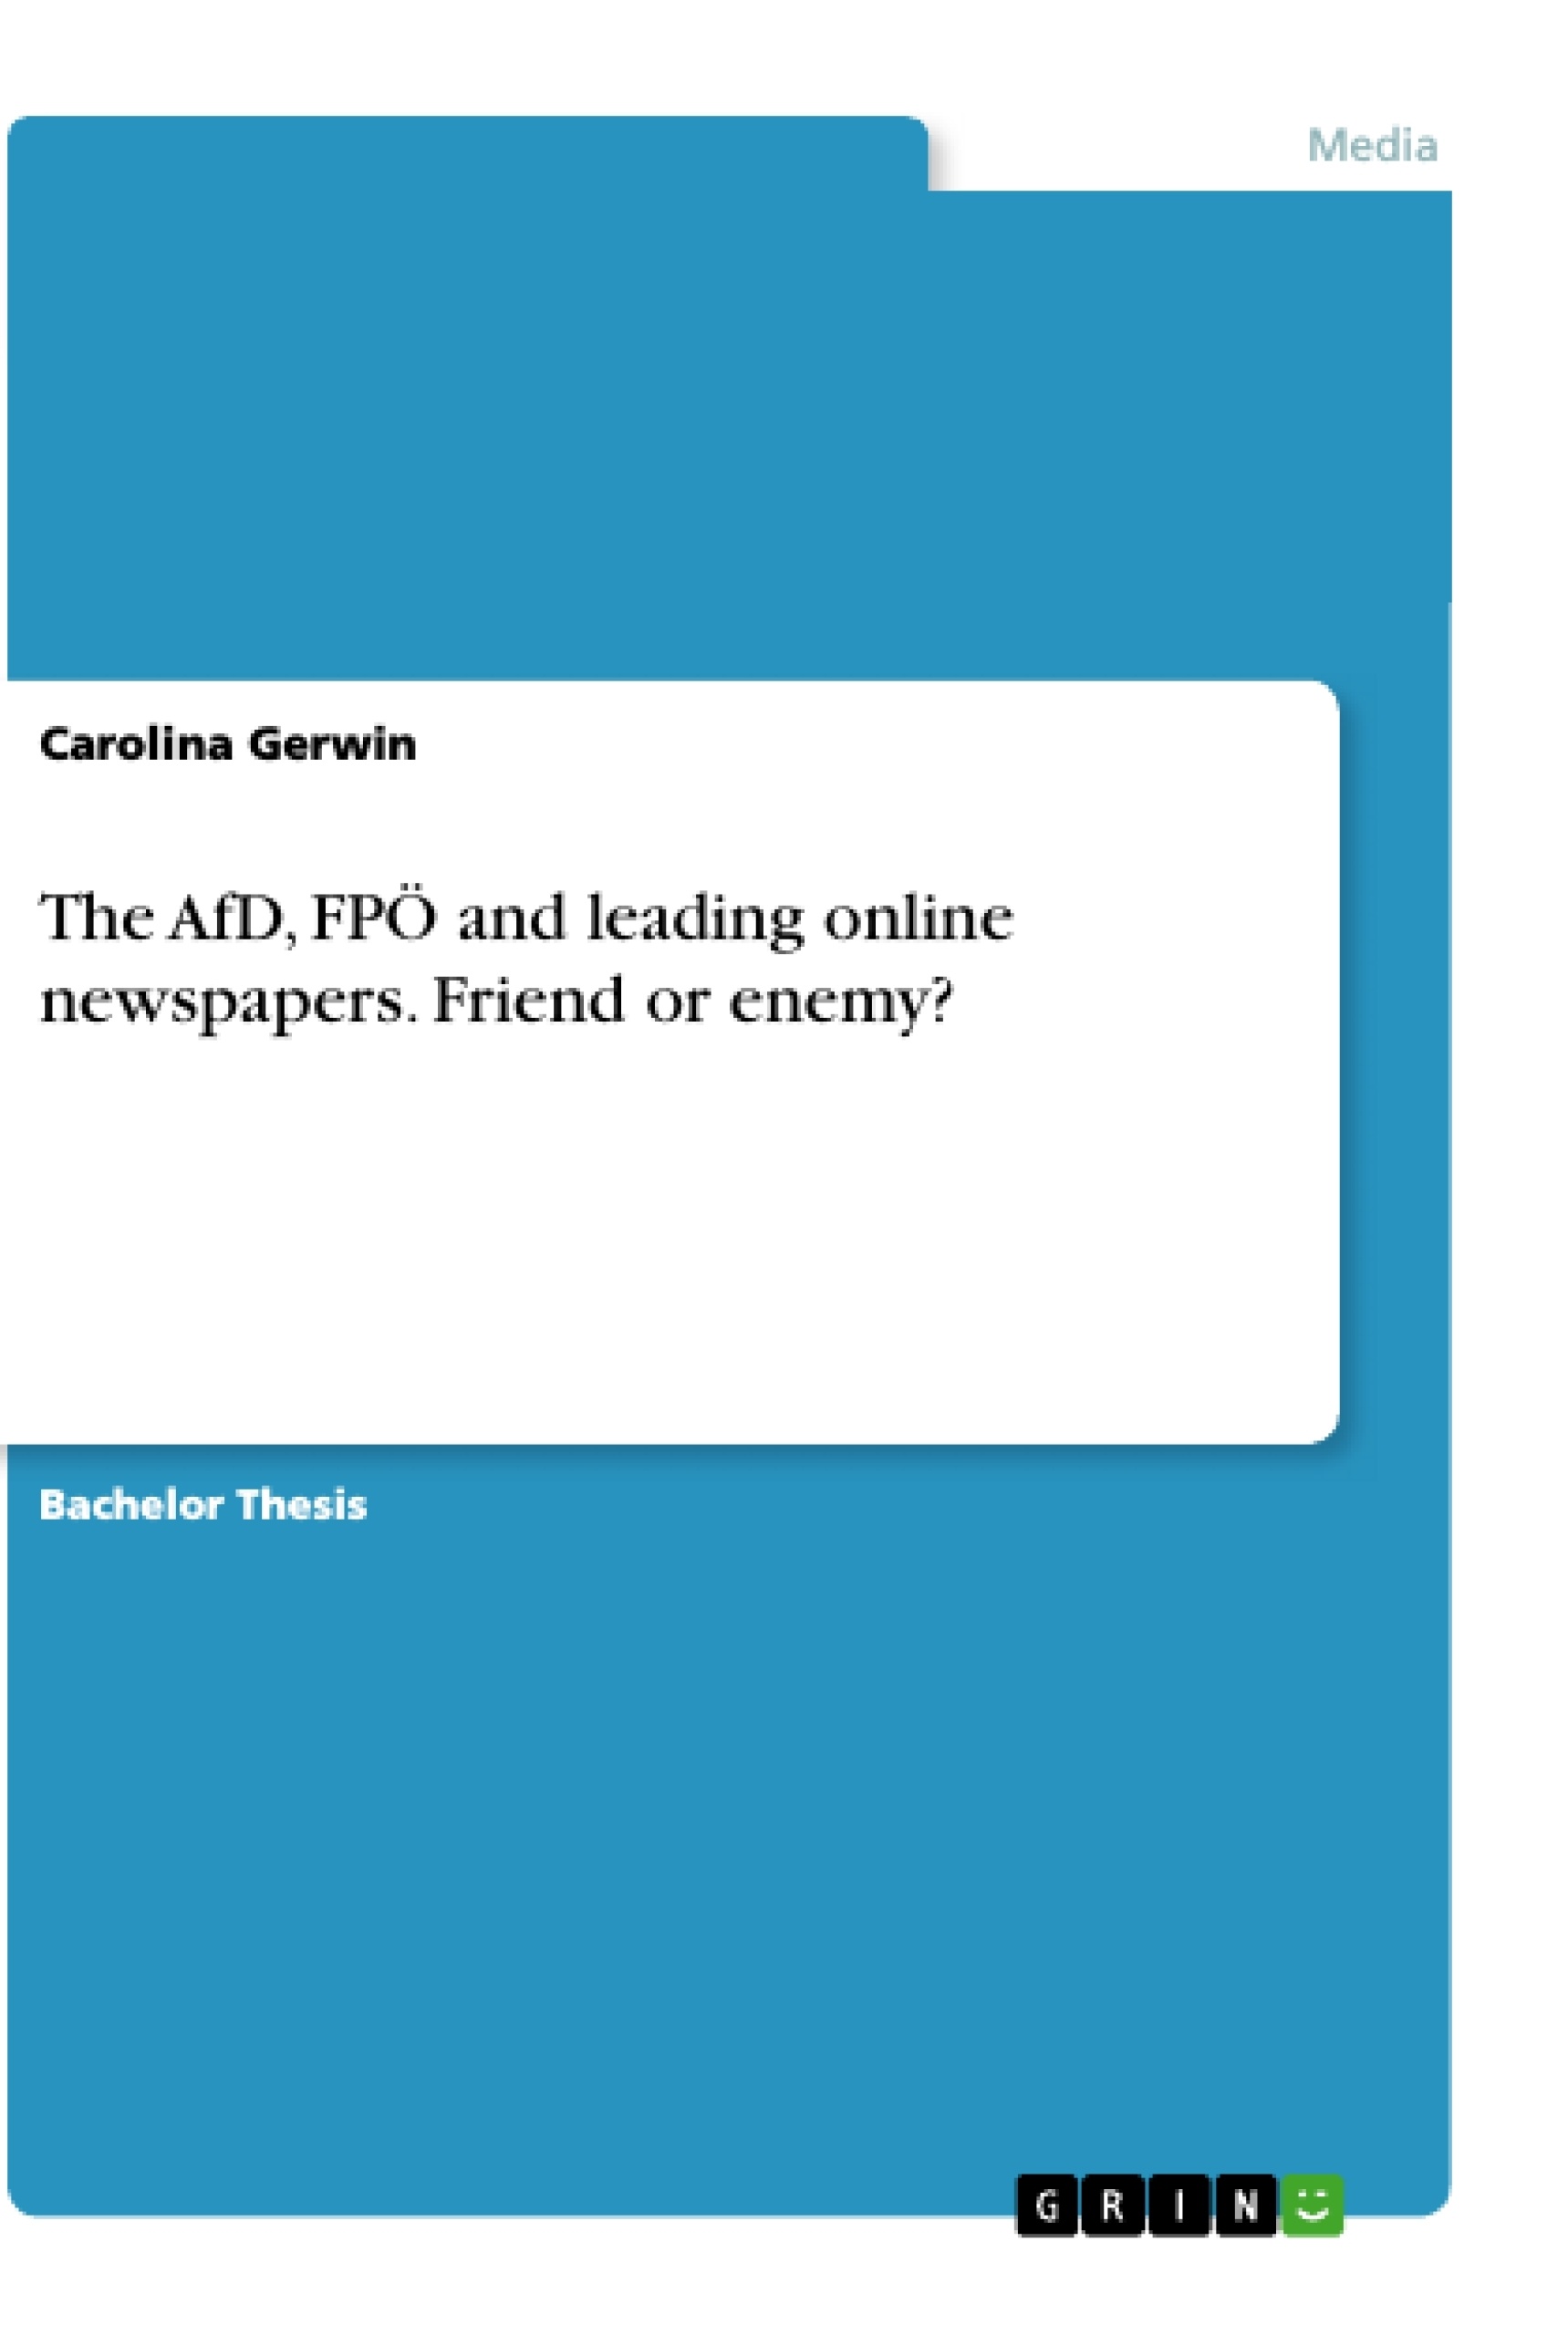 Title: The AfD, FPÖ and leading online newspapers. Friend or enemy?